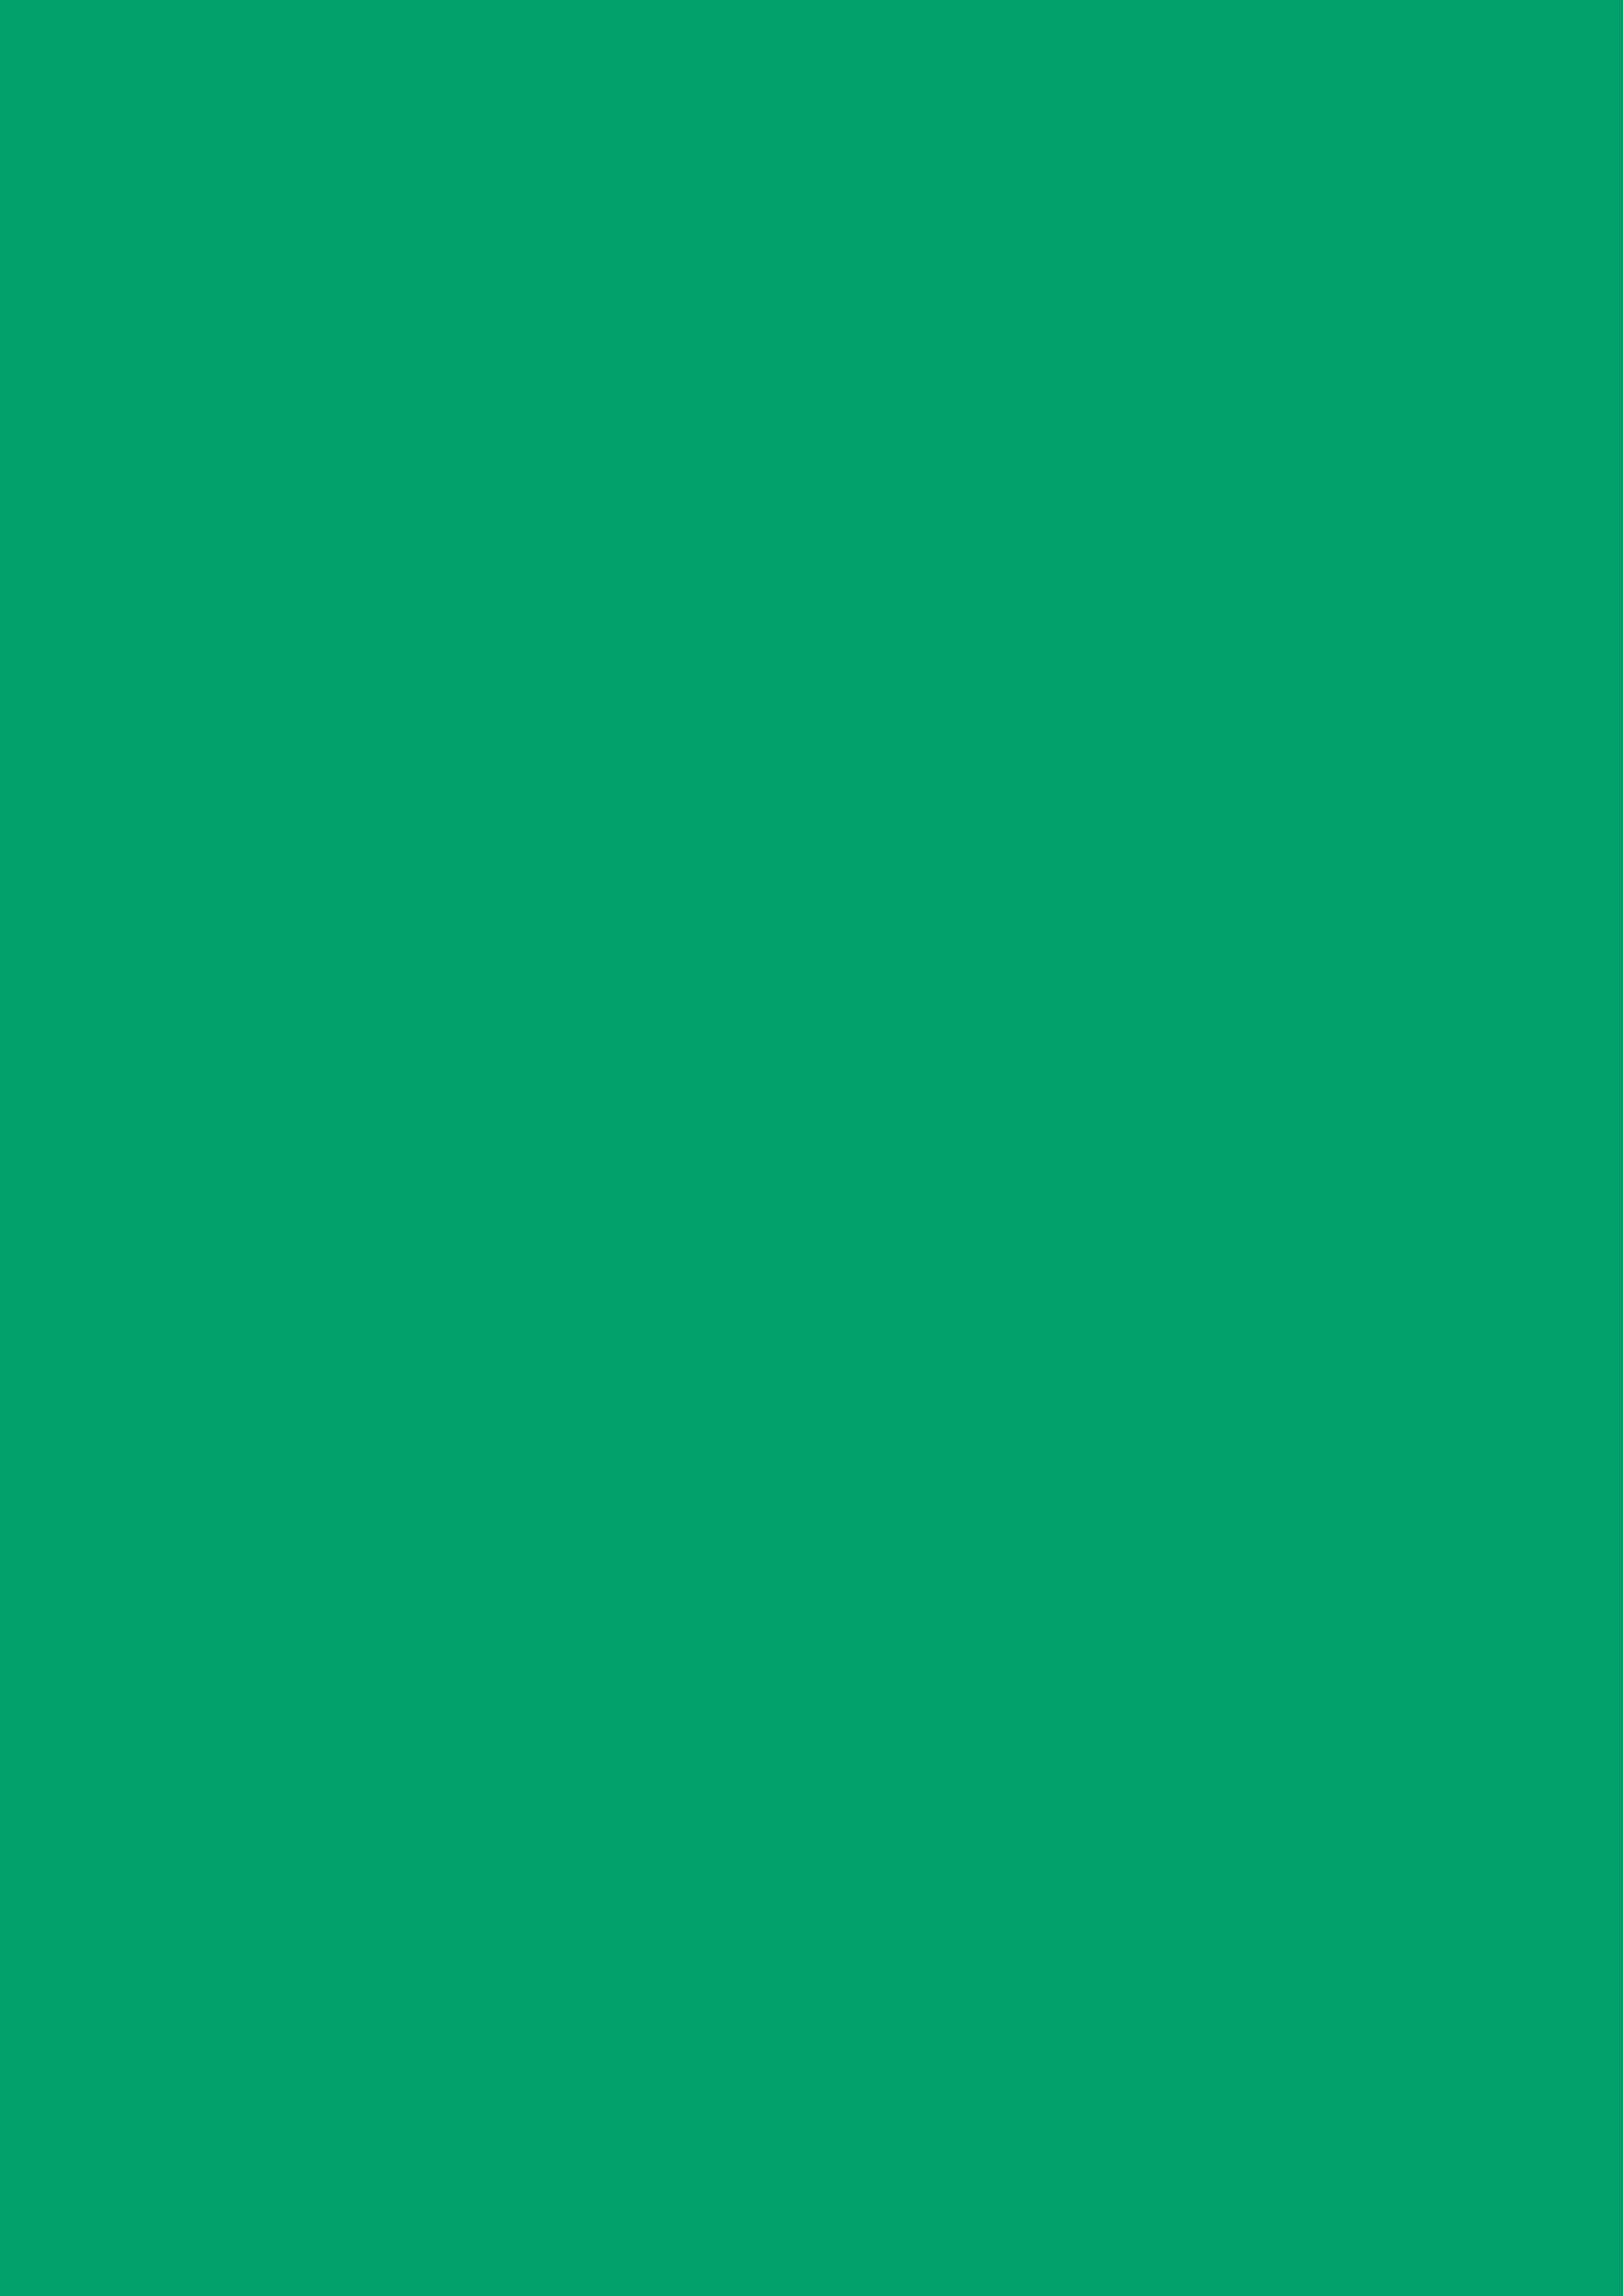 2480x3508 Green NCS Solid Color Background